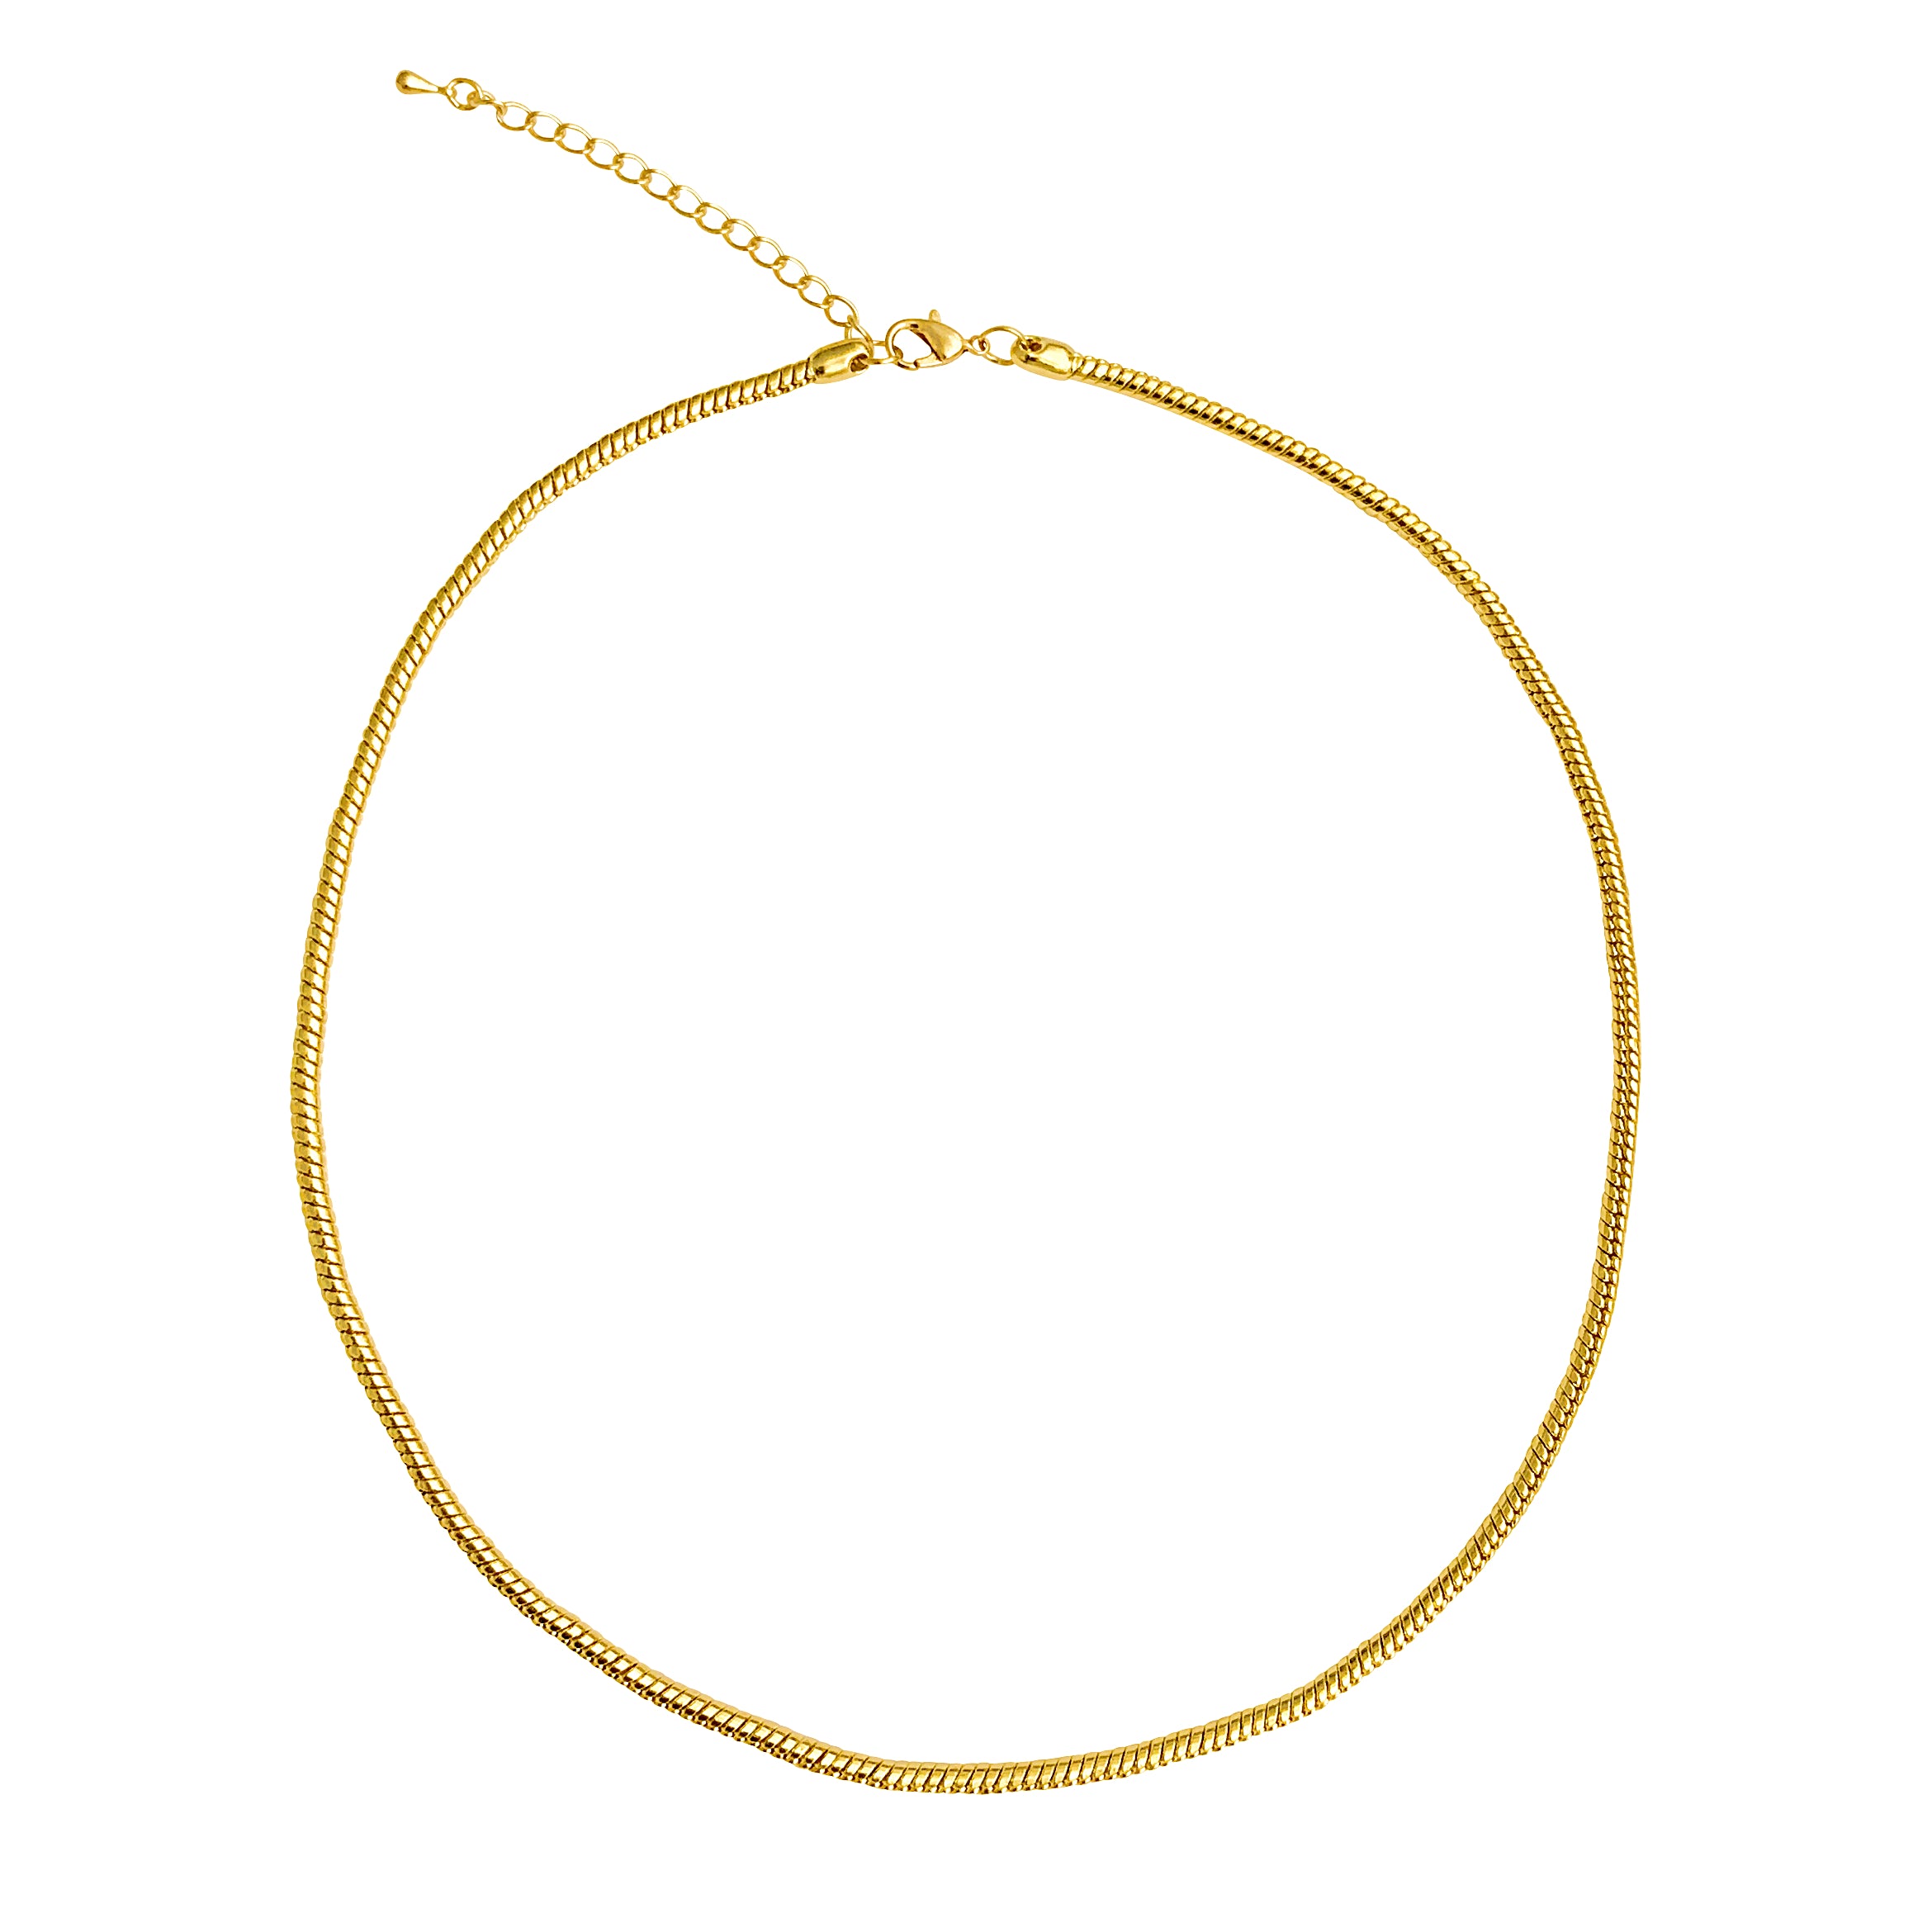 Ultra Thin Gold Snake Chain Necklace